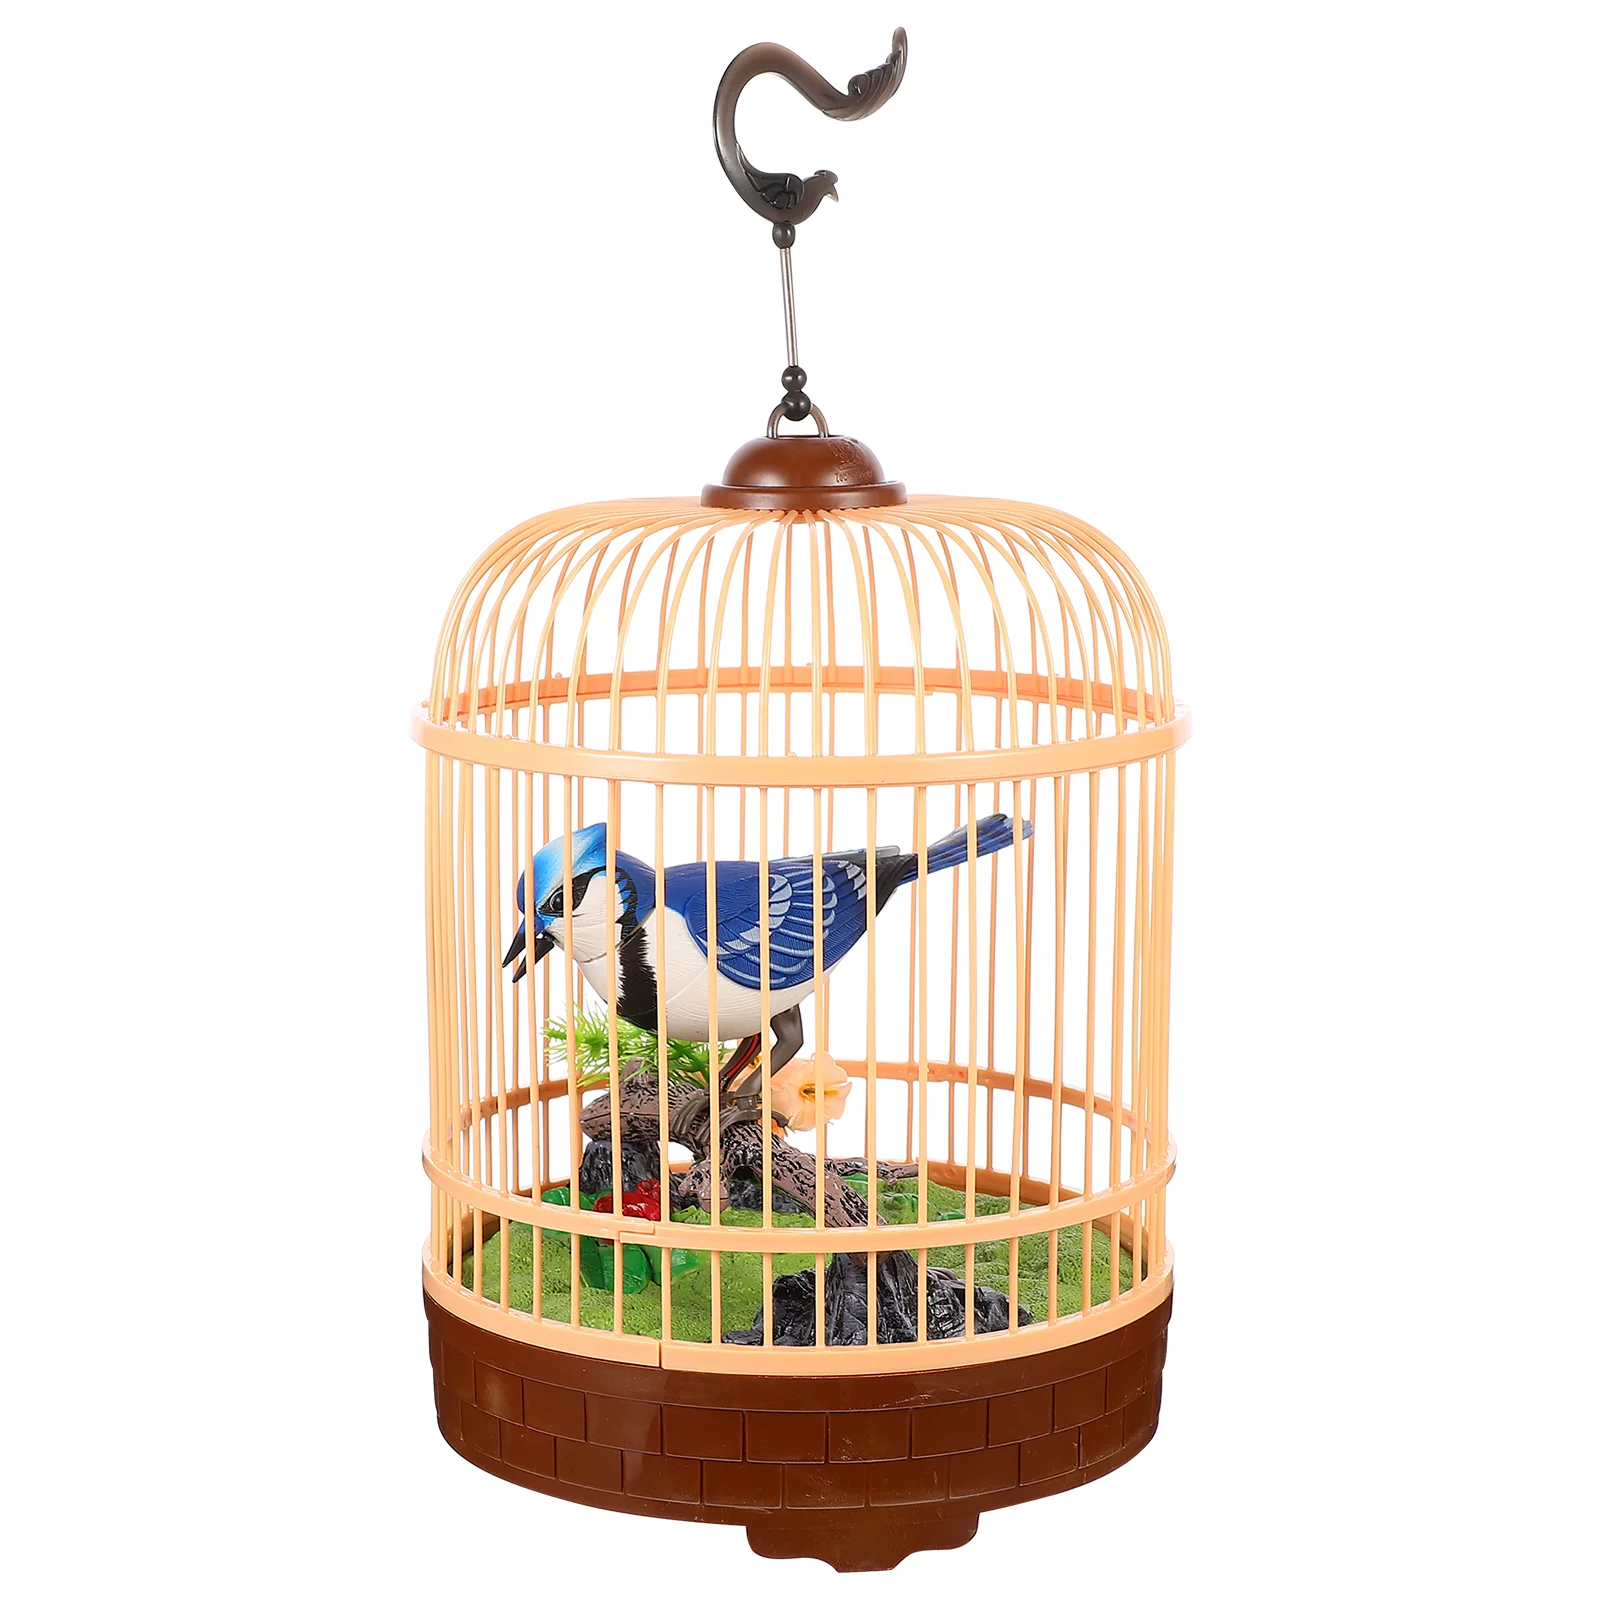 Sound Activated Bird Artificial Cage Kids Hanging Toy Toys For Birds Statue Figurines Fake Parrot Singing Chirping